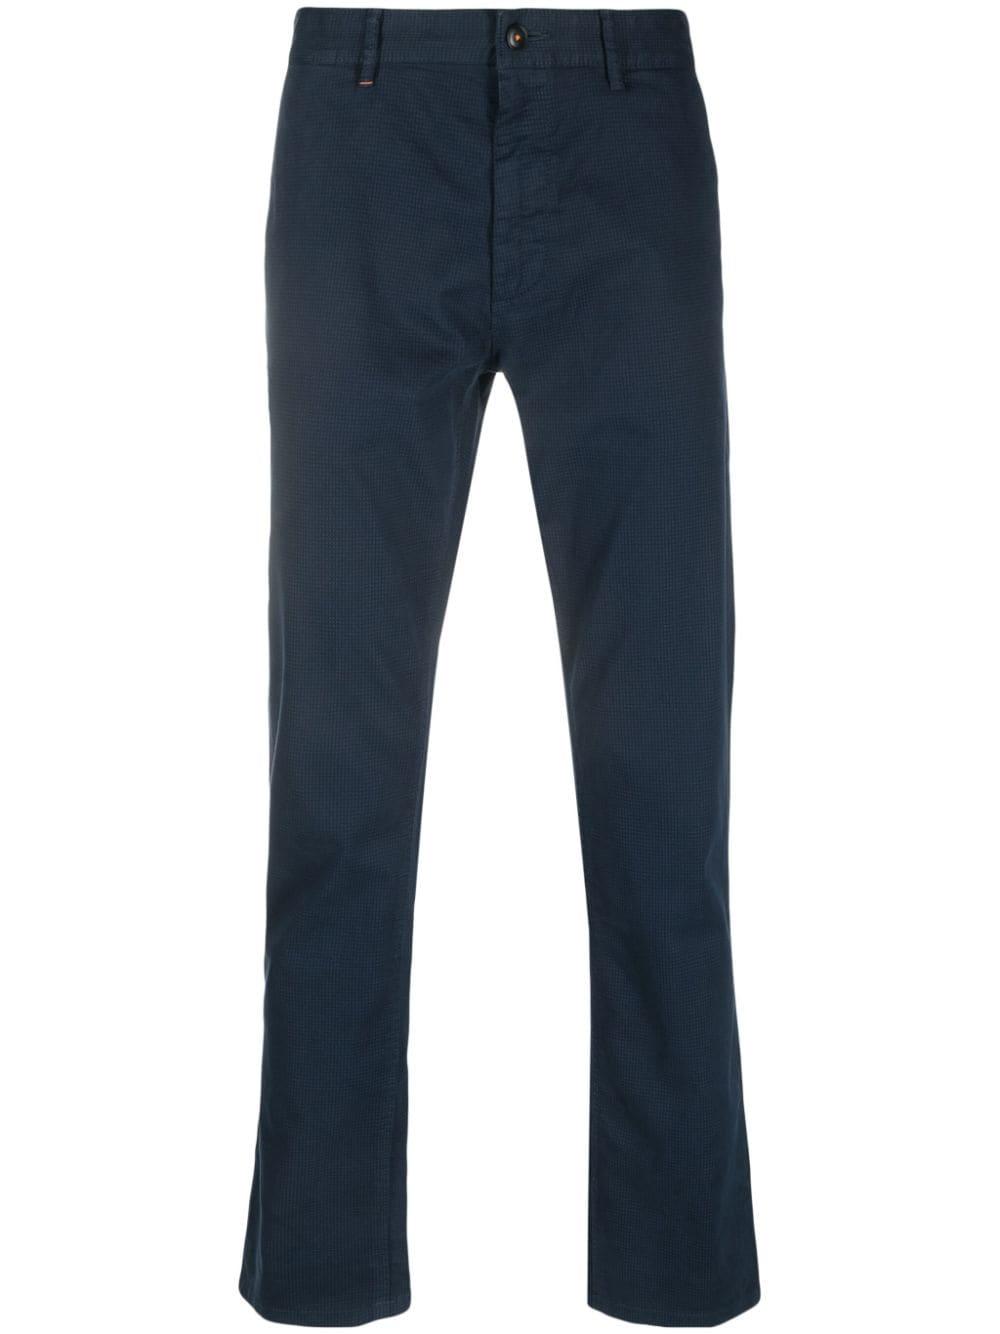 BOSS by HUGO BOSS Slim-fit Chino Trousers in Blue for Men | Lyst